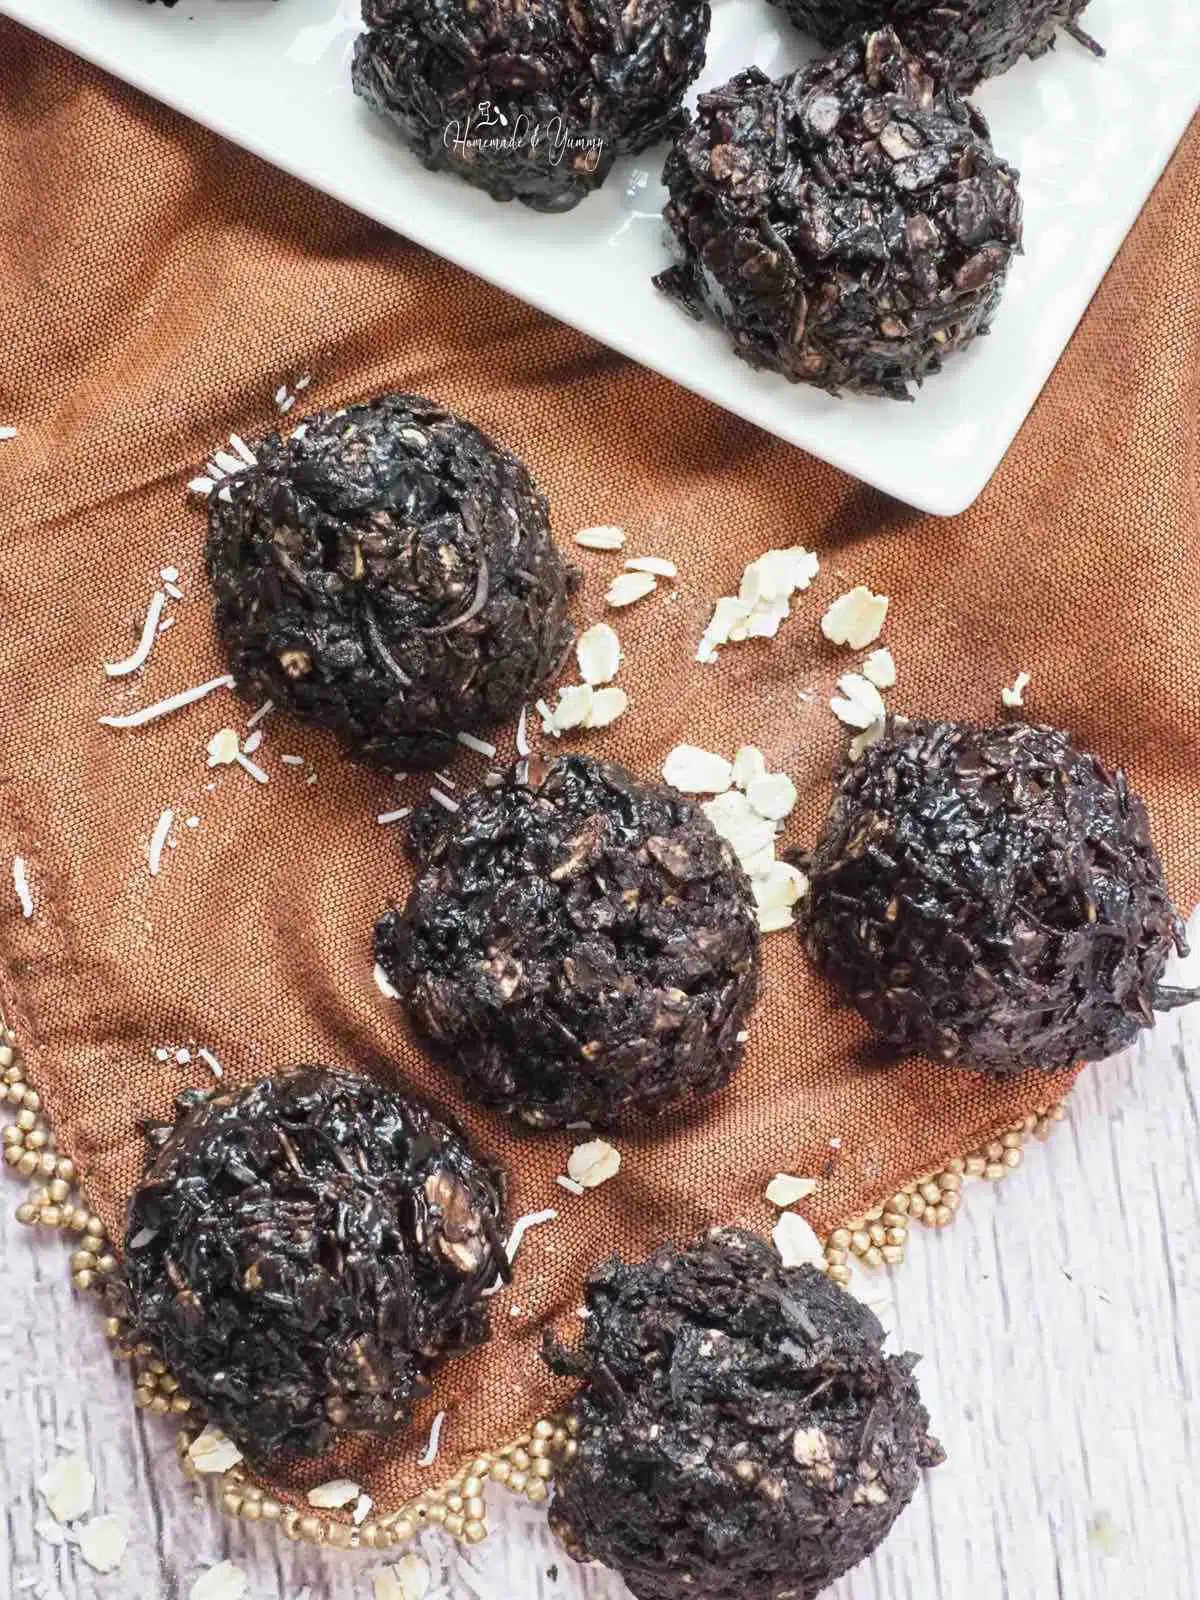 Dark Chocolate and Coconut Macaroons ready to eat.